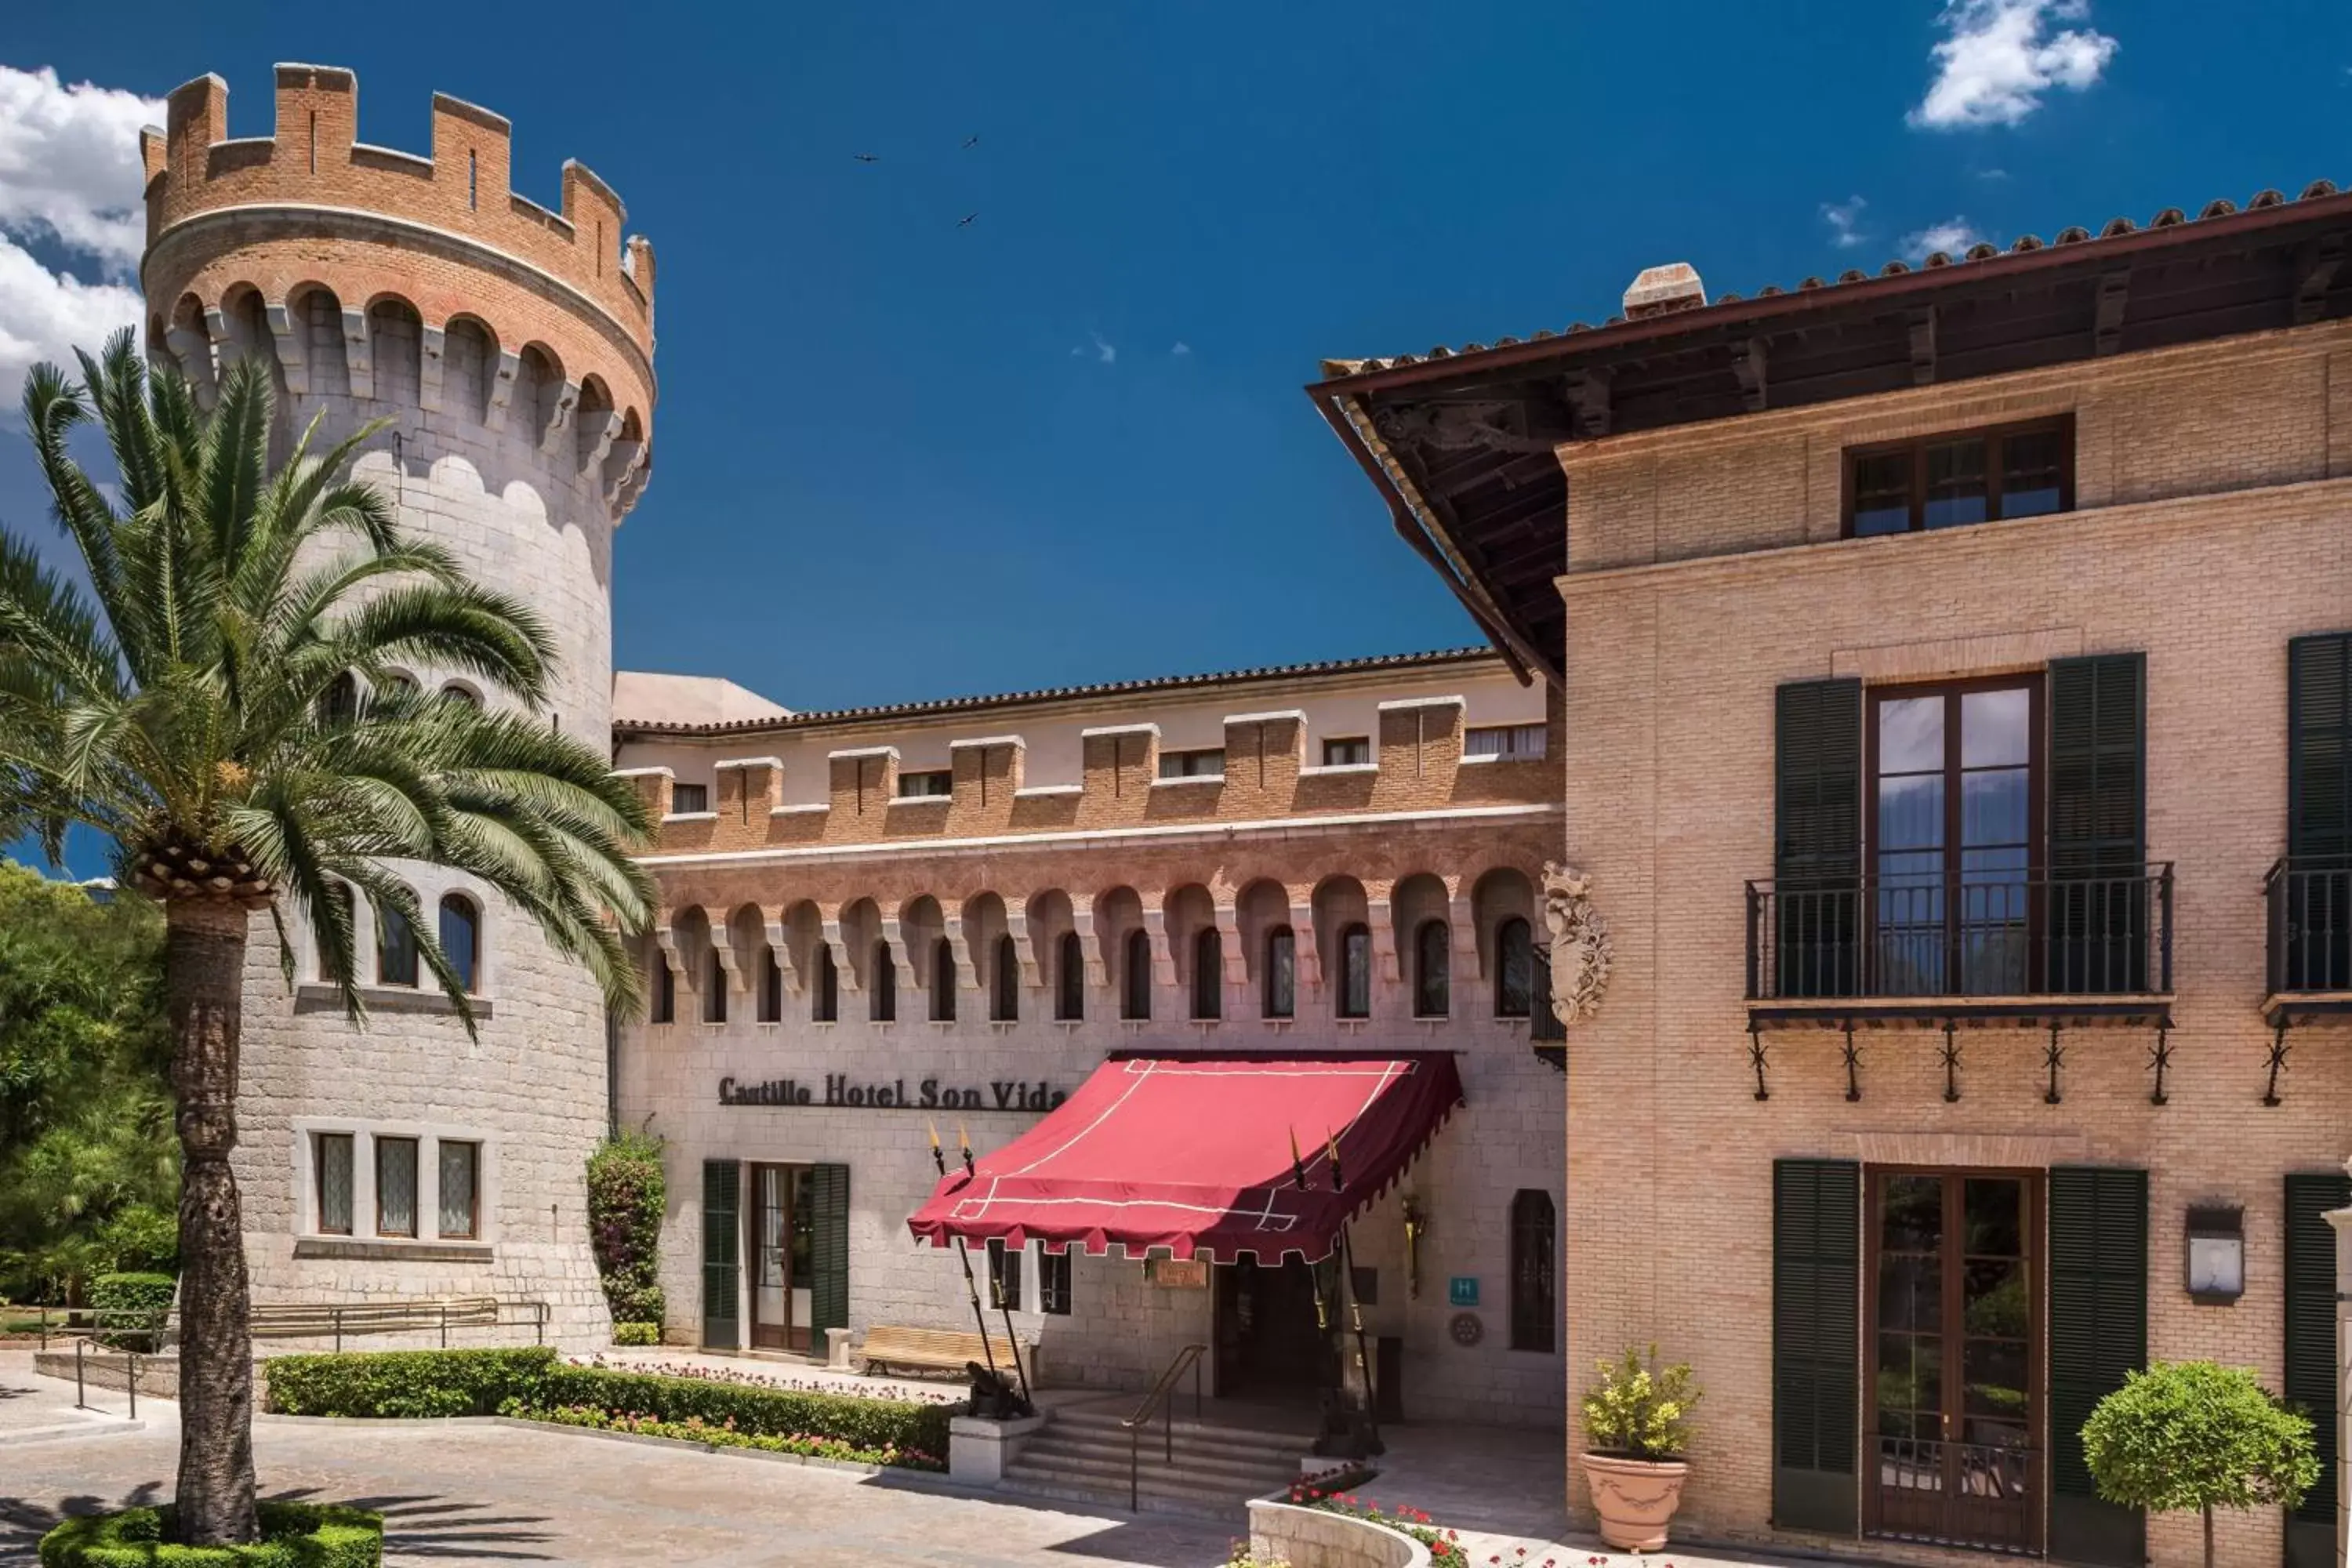 Property Building in Castillo Hotel Son Vida, a Luxury Collection Hotel, Mallorca - Adults Only